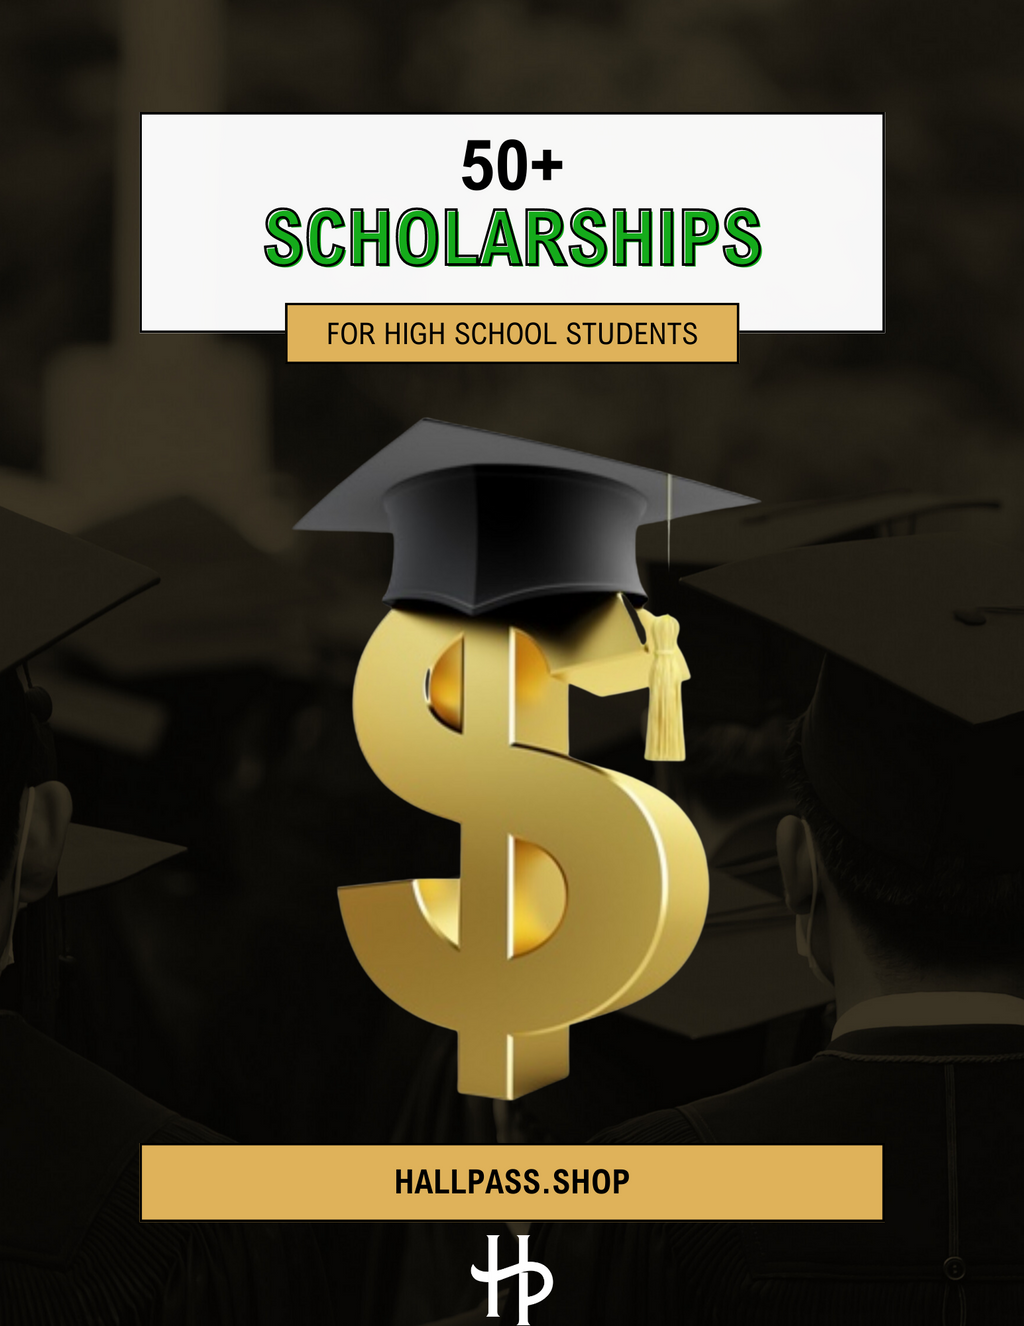 50+ Scholarships for High School Students